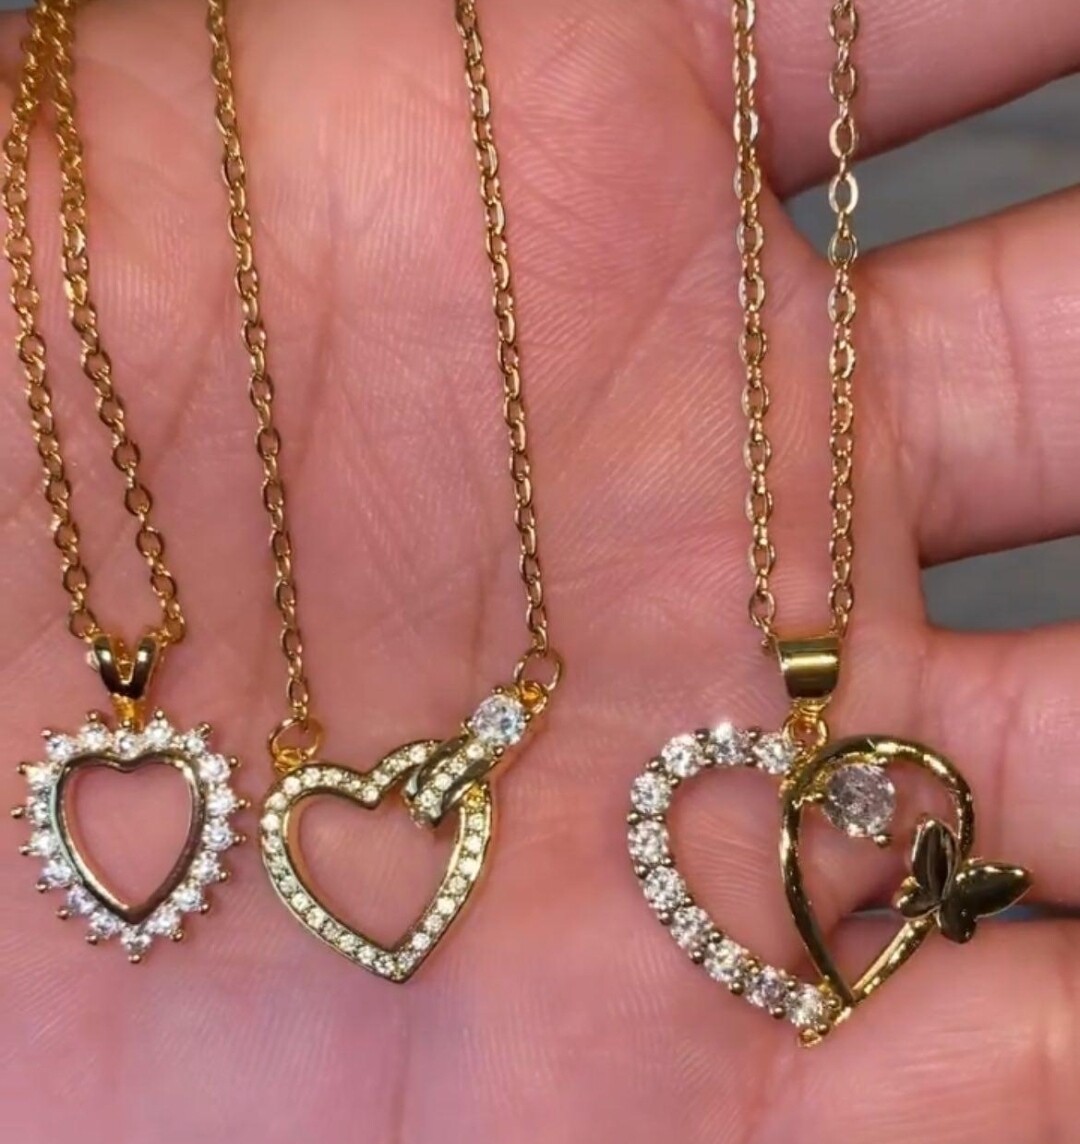 Heart necklace (2nd necklace)